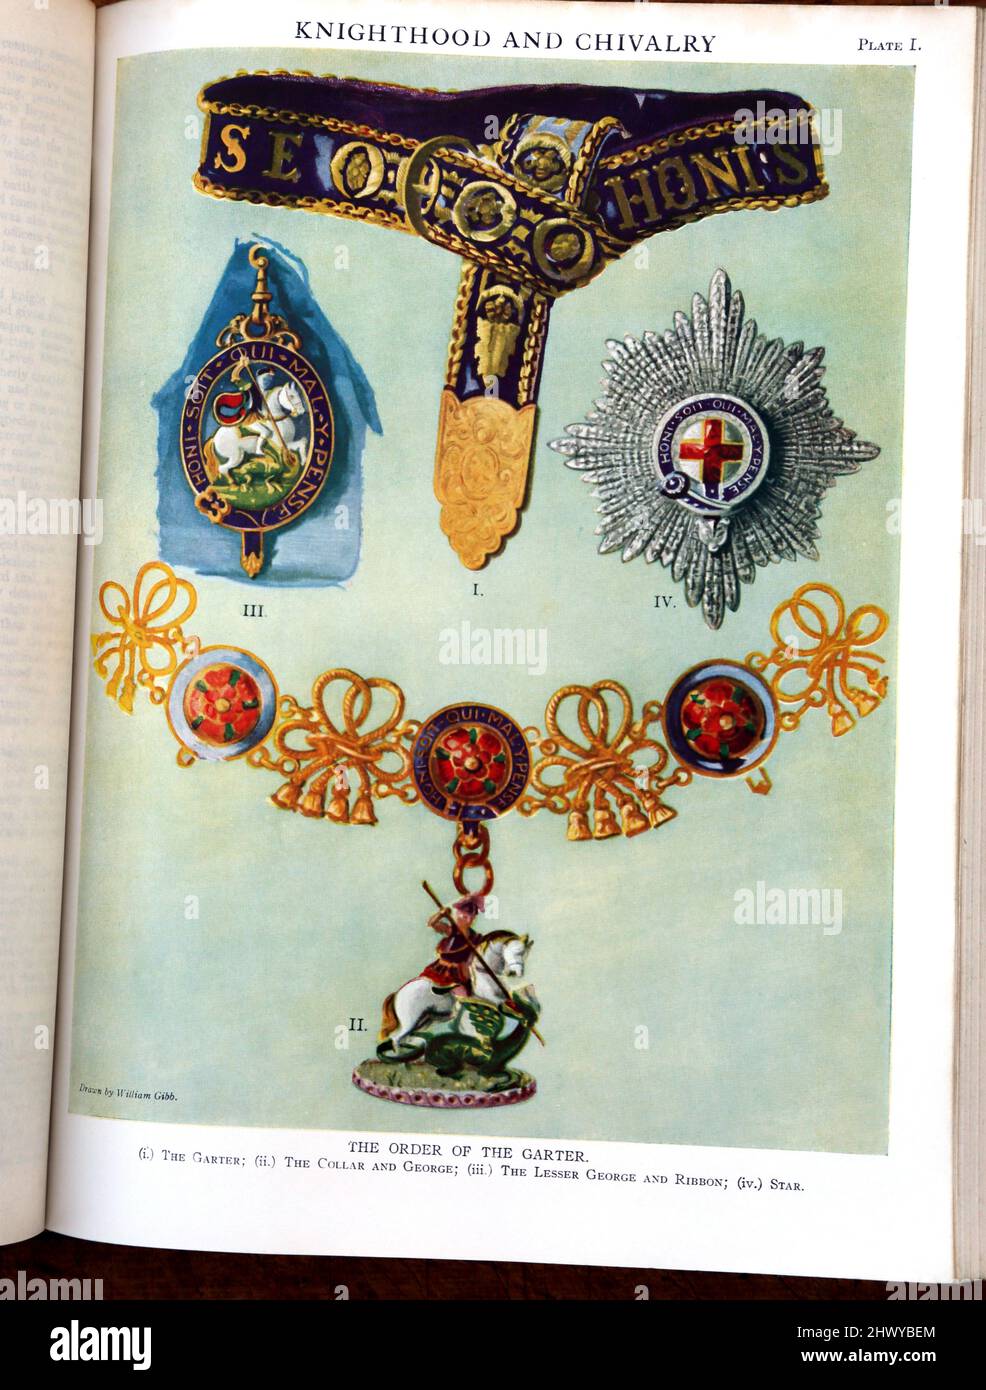 Encyclopedia Britannica Eleventh Edition Showing Pages on Knighthood and Chivalry Medals - Order of the Garter Stock Photo